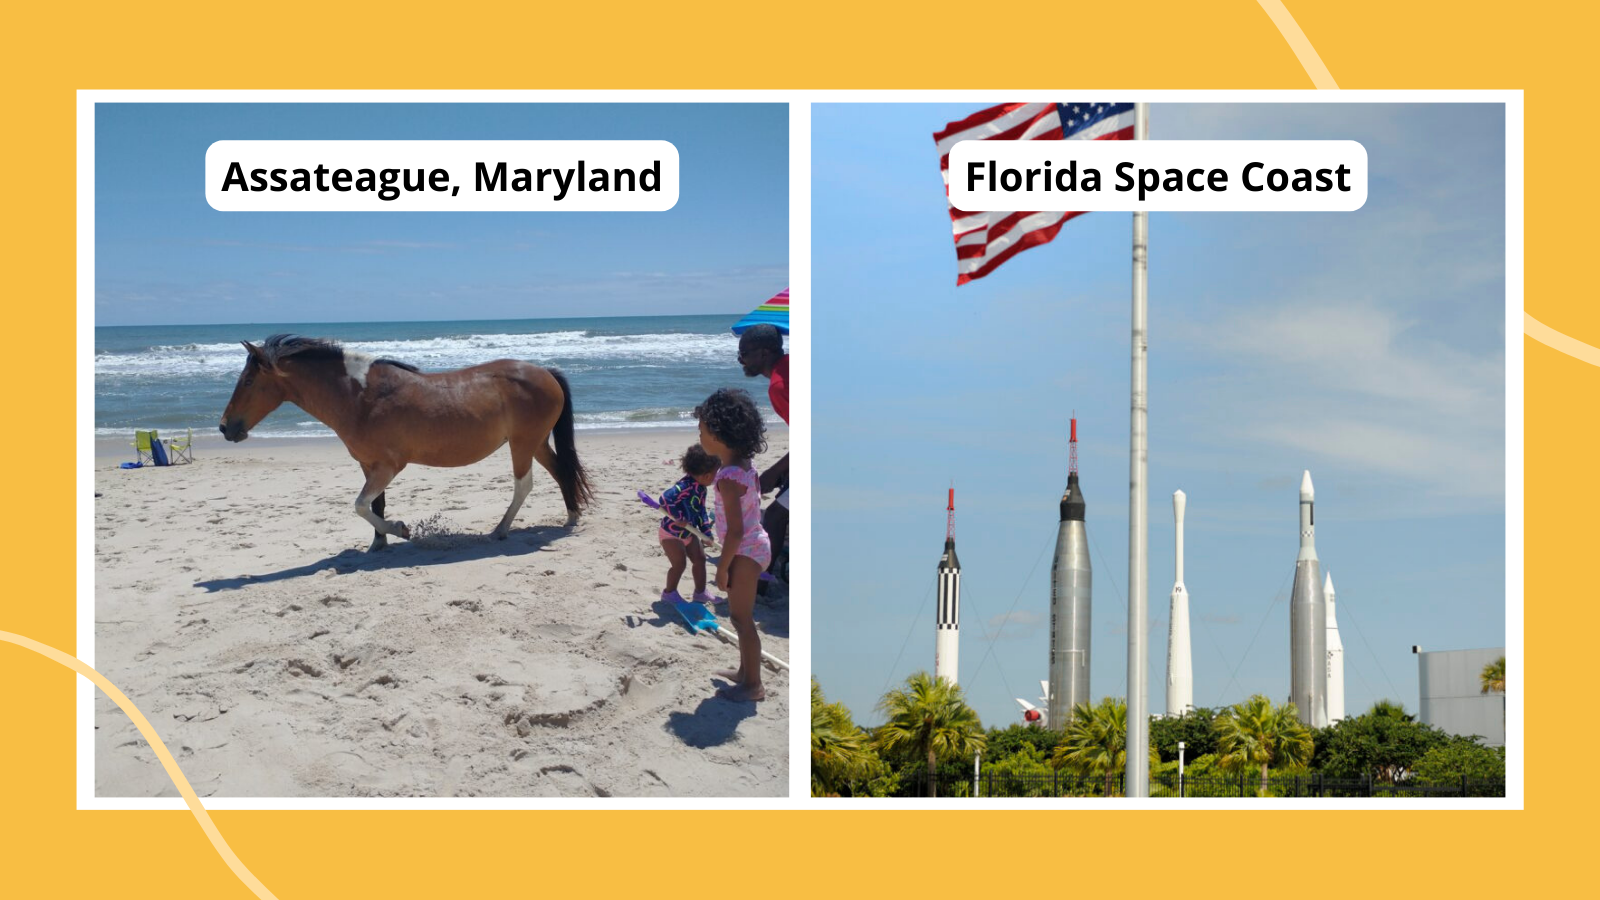 Examples of best family vacations, including horse running on beach in Assateague, MD and rockets and American flag at Florida Space Coast.